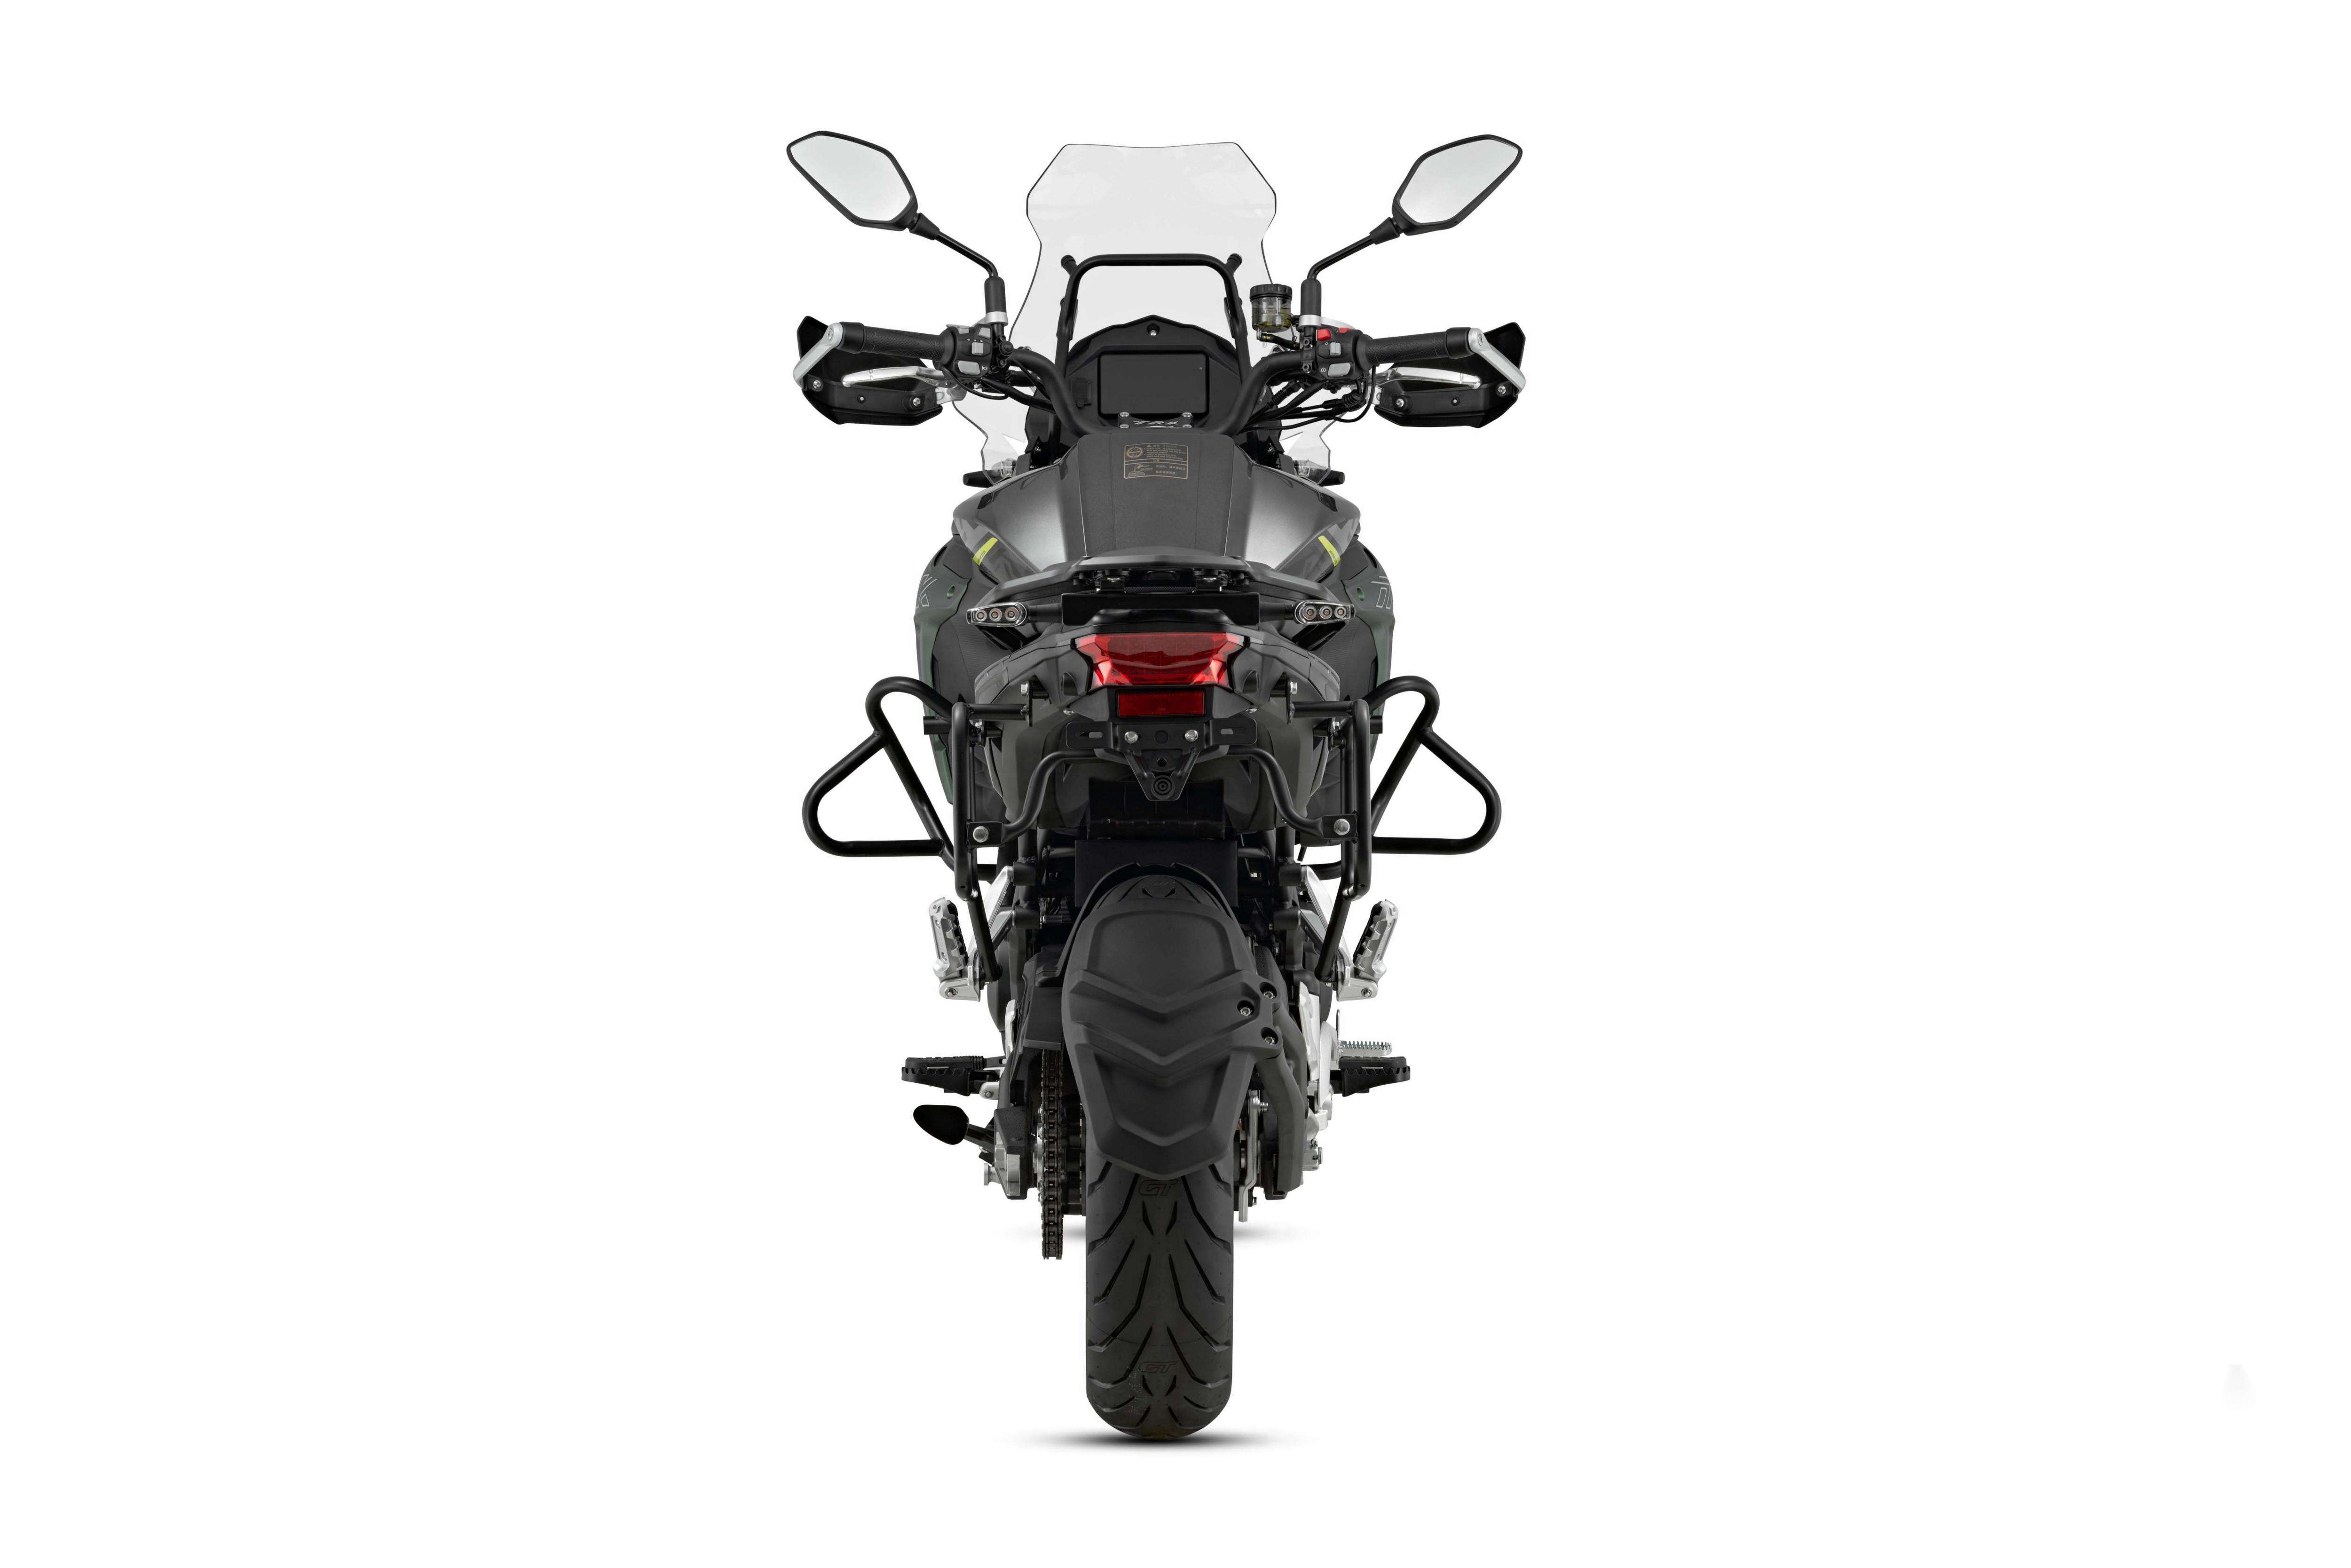 Benelli Adult 6-speed Motorcycle 502cc TRK Premium Rally car An affordable four-stroke chain drive motorcycle details